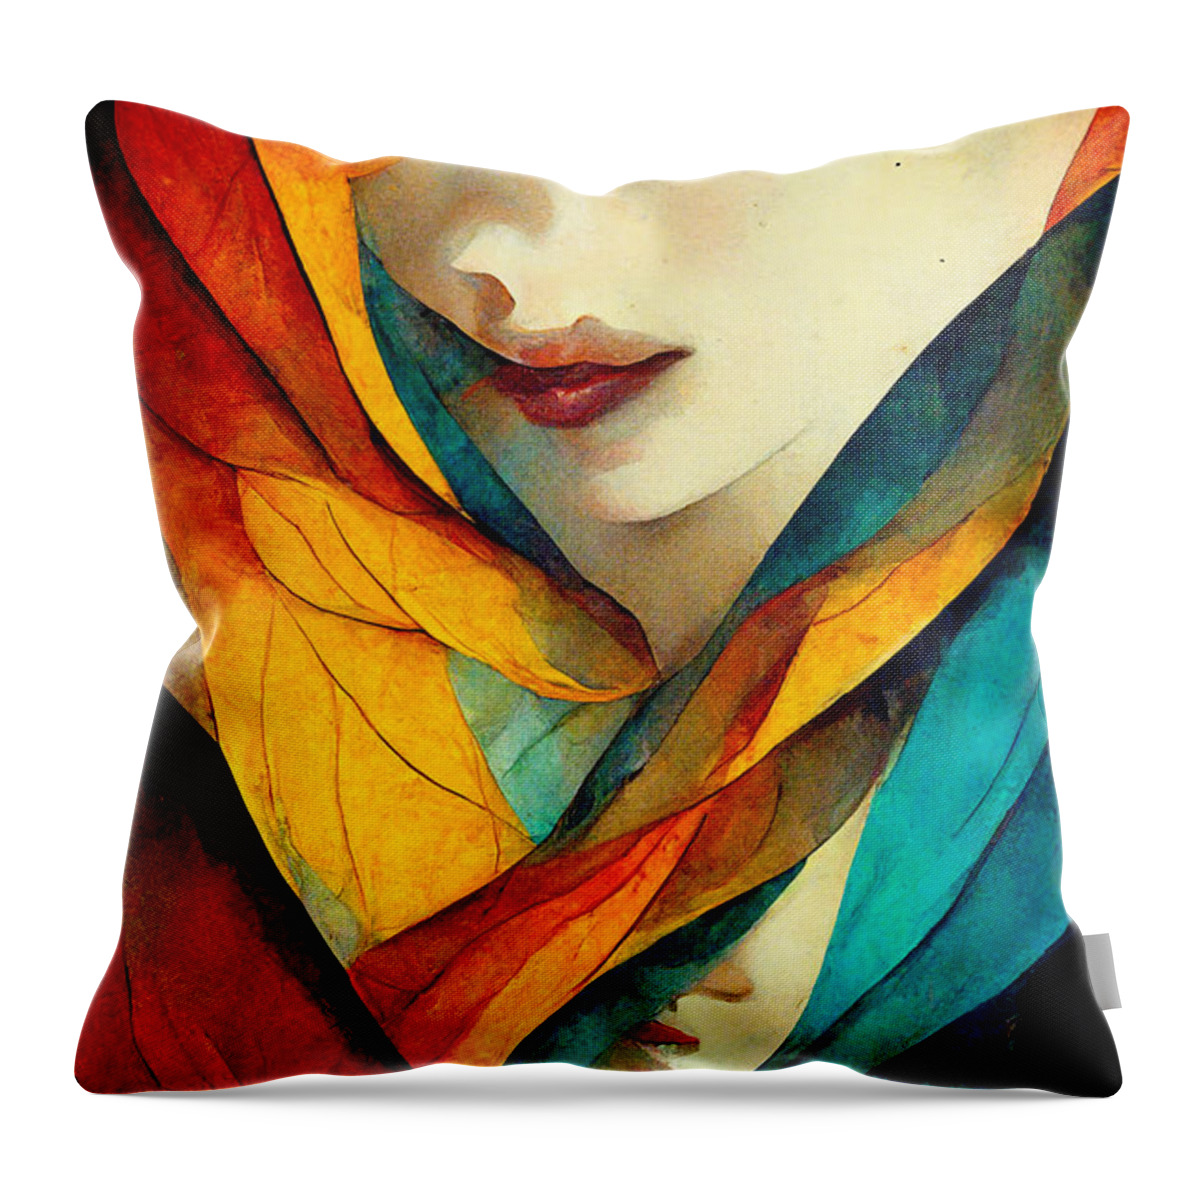 Happiness Throw Pillow featuring the digital art Happiness #6 by Sabantha